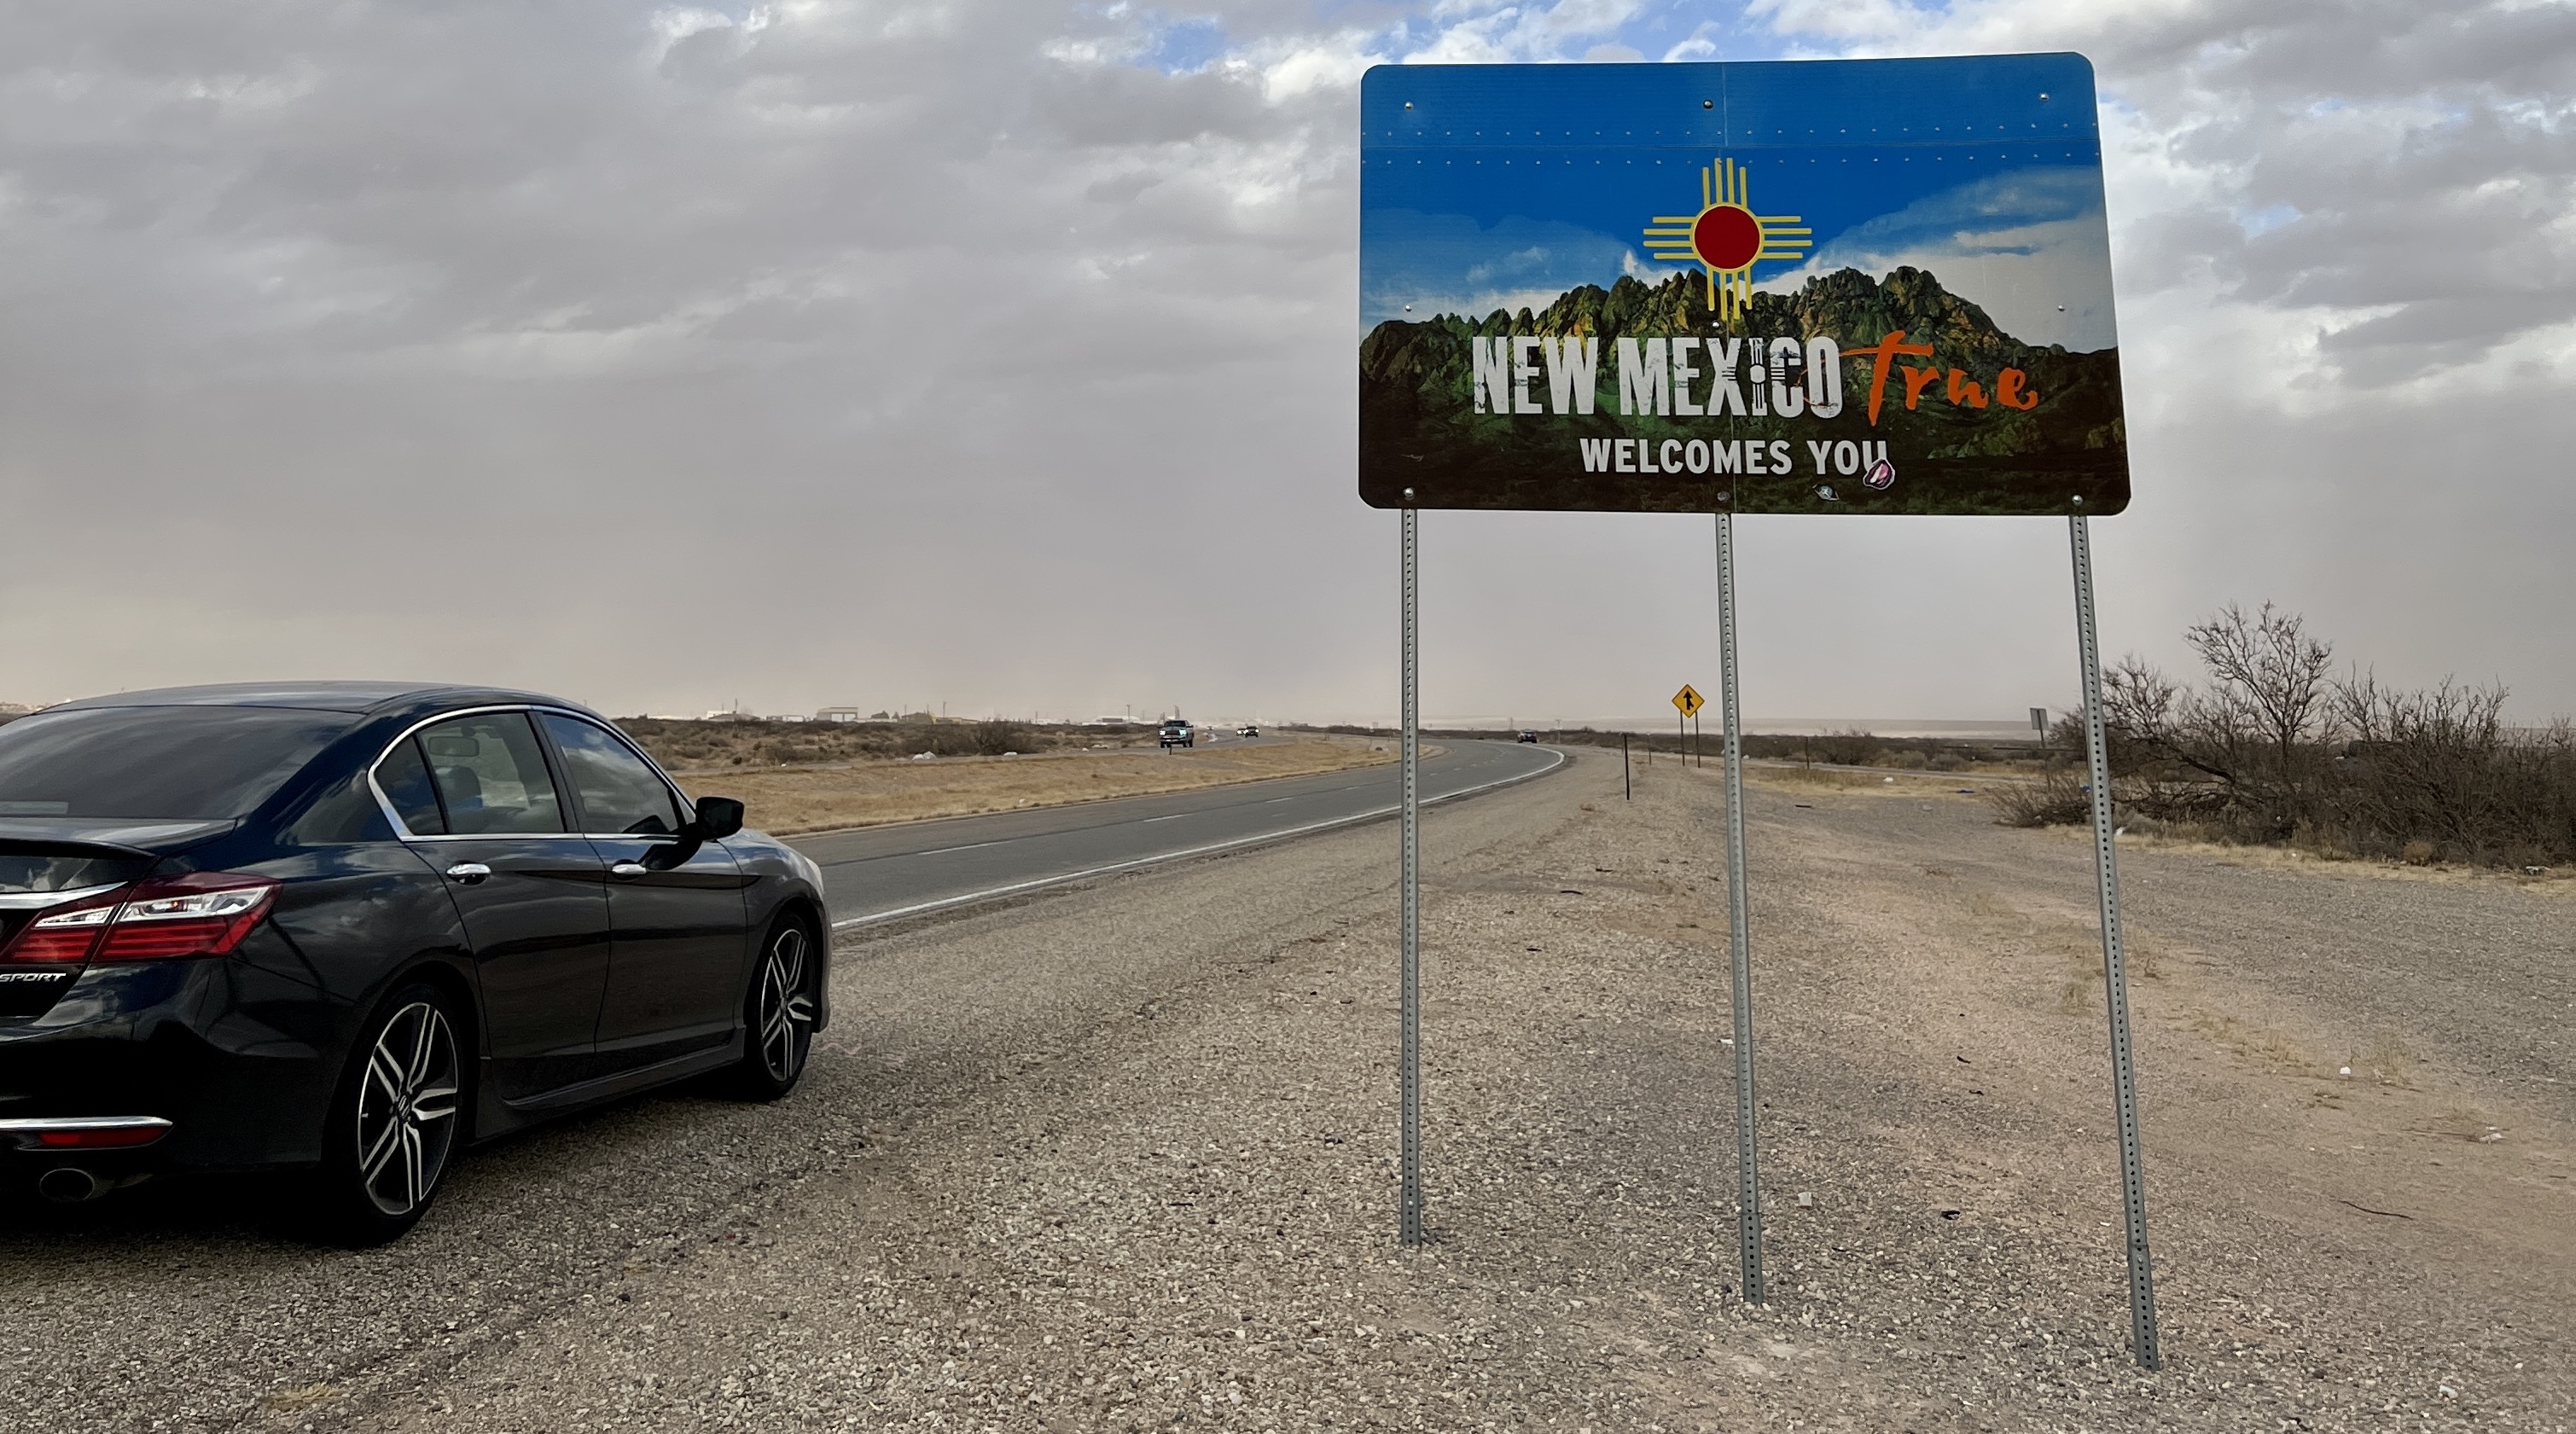 The Ultimate Road Trip from Houston, TX to New Mexico